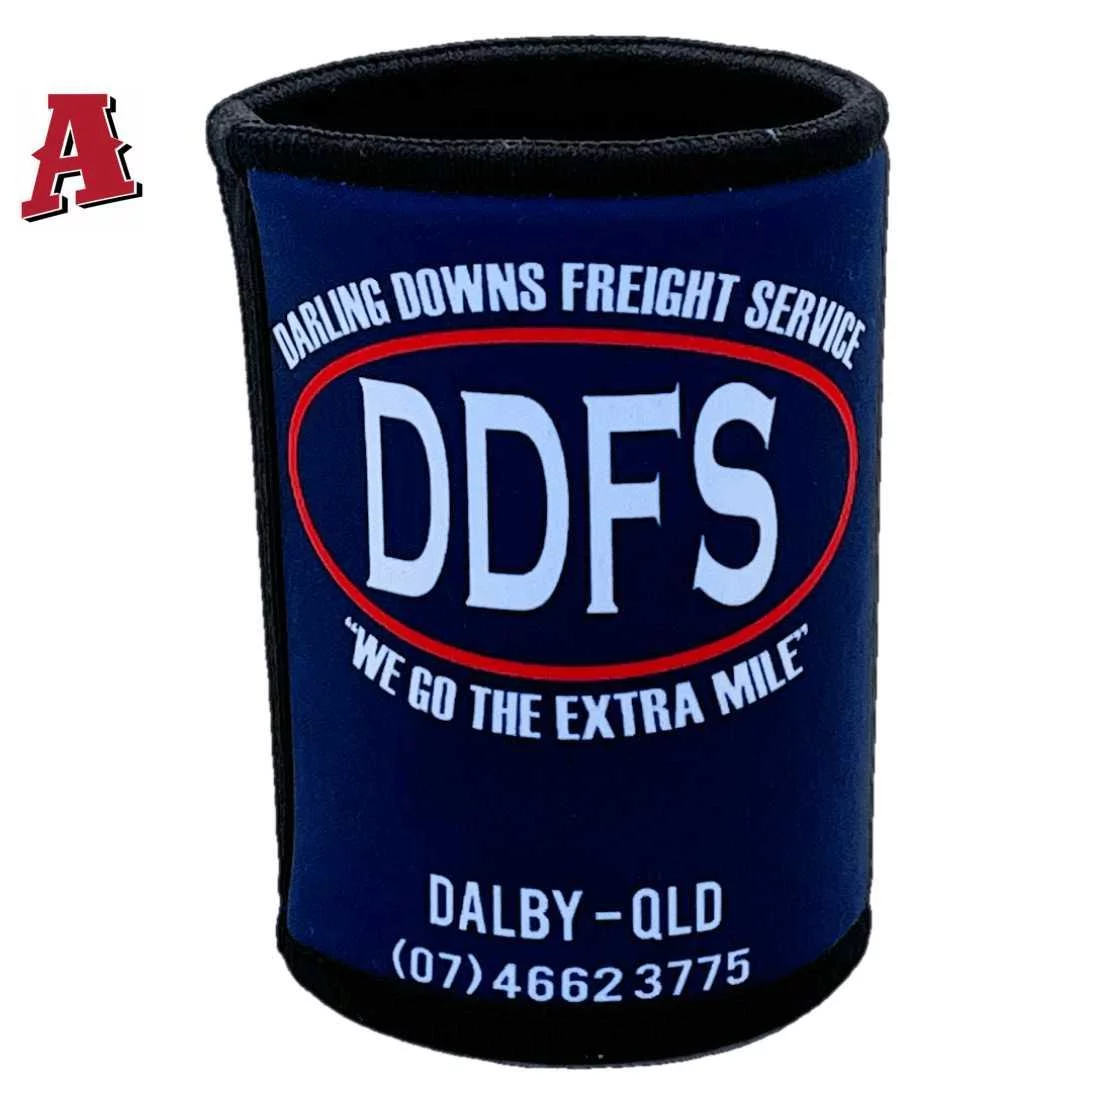 Darling Downs Freight Service Dalby QLD Custom Stubby Holder - Koozie - 5mm Neoprene Glued & Stitched Top & Bottom Seams Navy